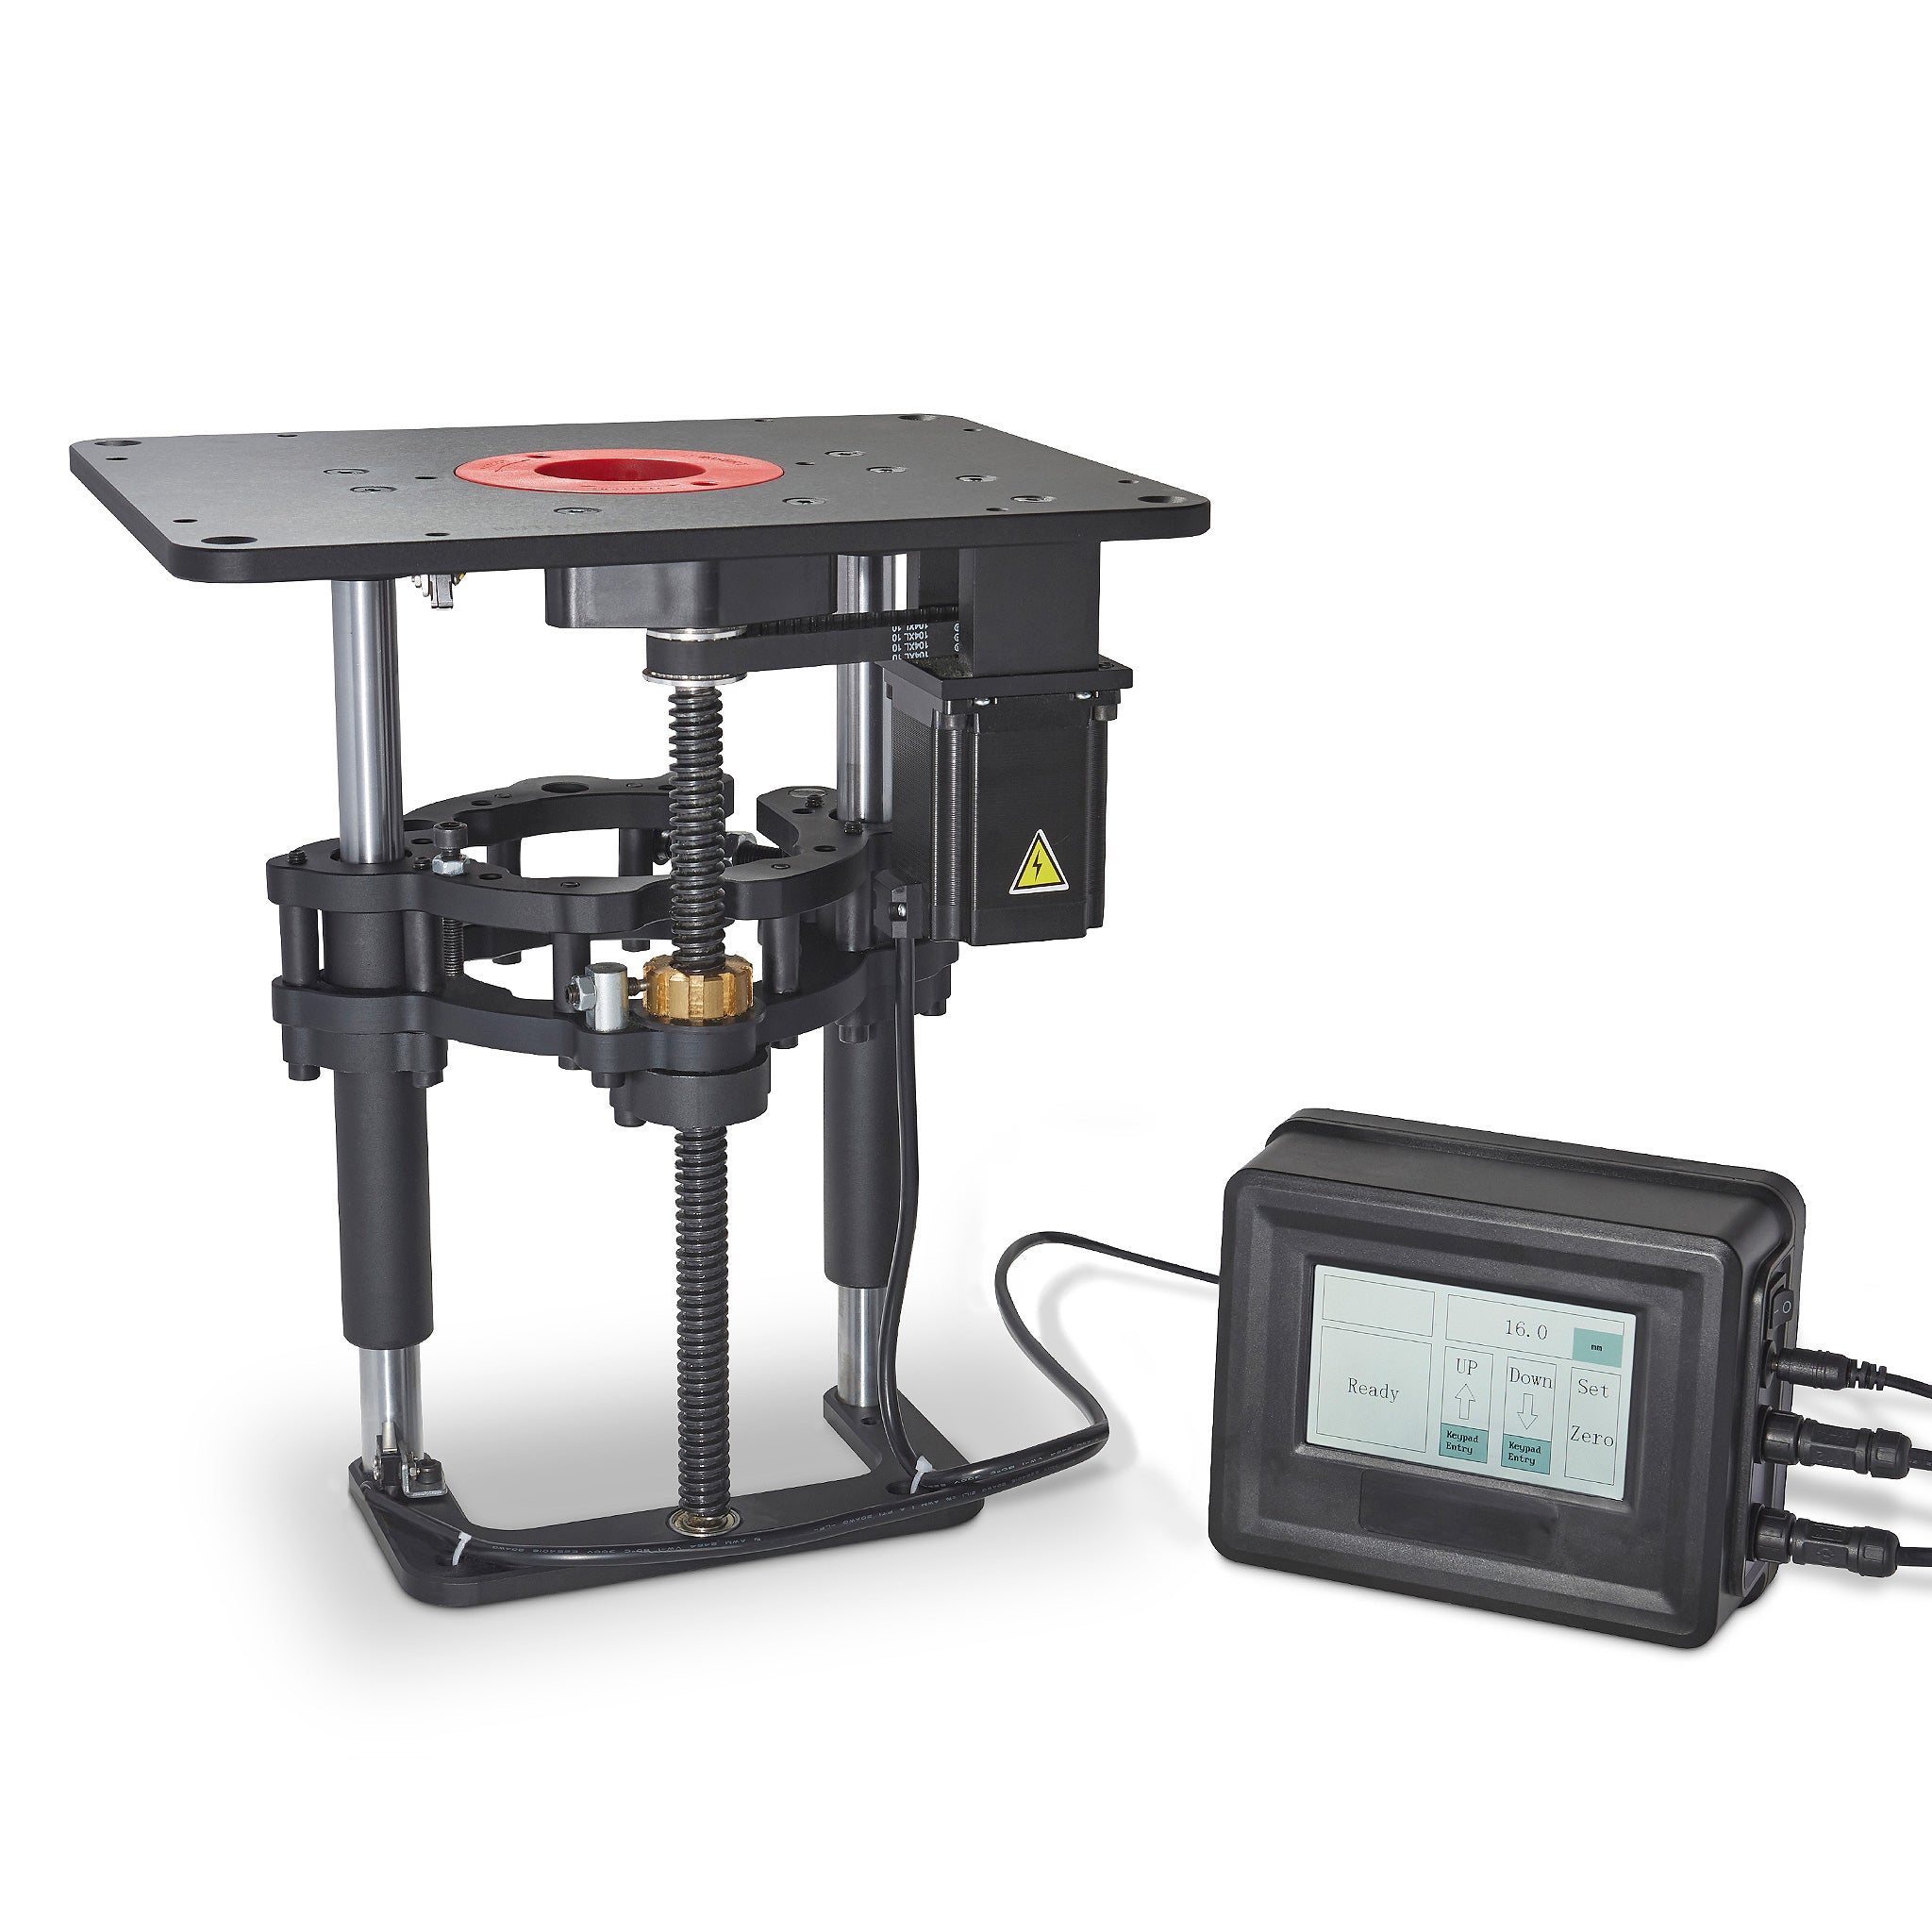 Phenolic Router Table - R20 Electronic Lift and Motor